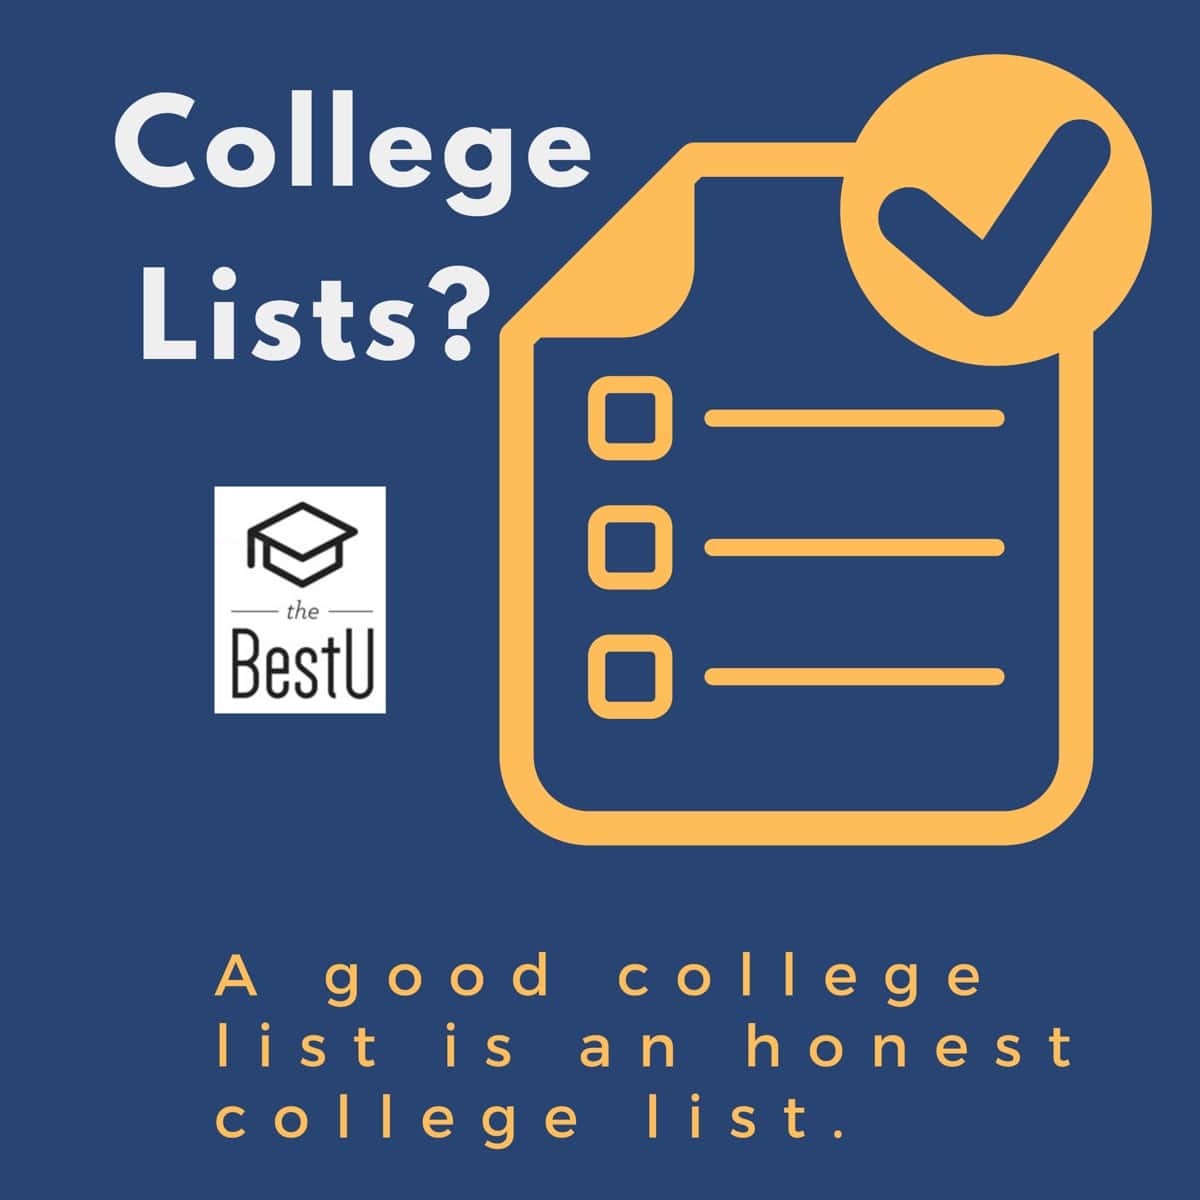 Want to build a good college list? Make it an honest one